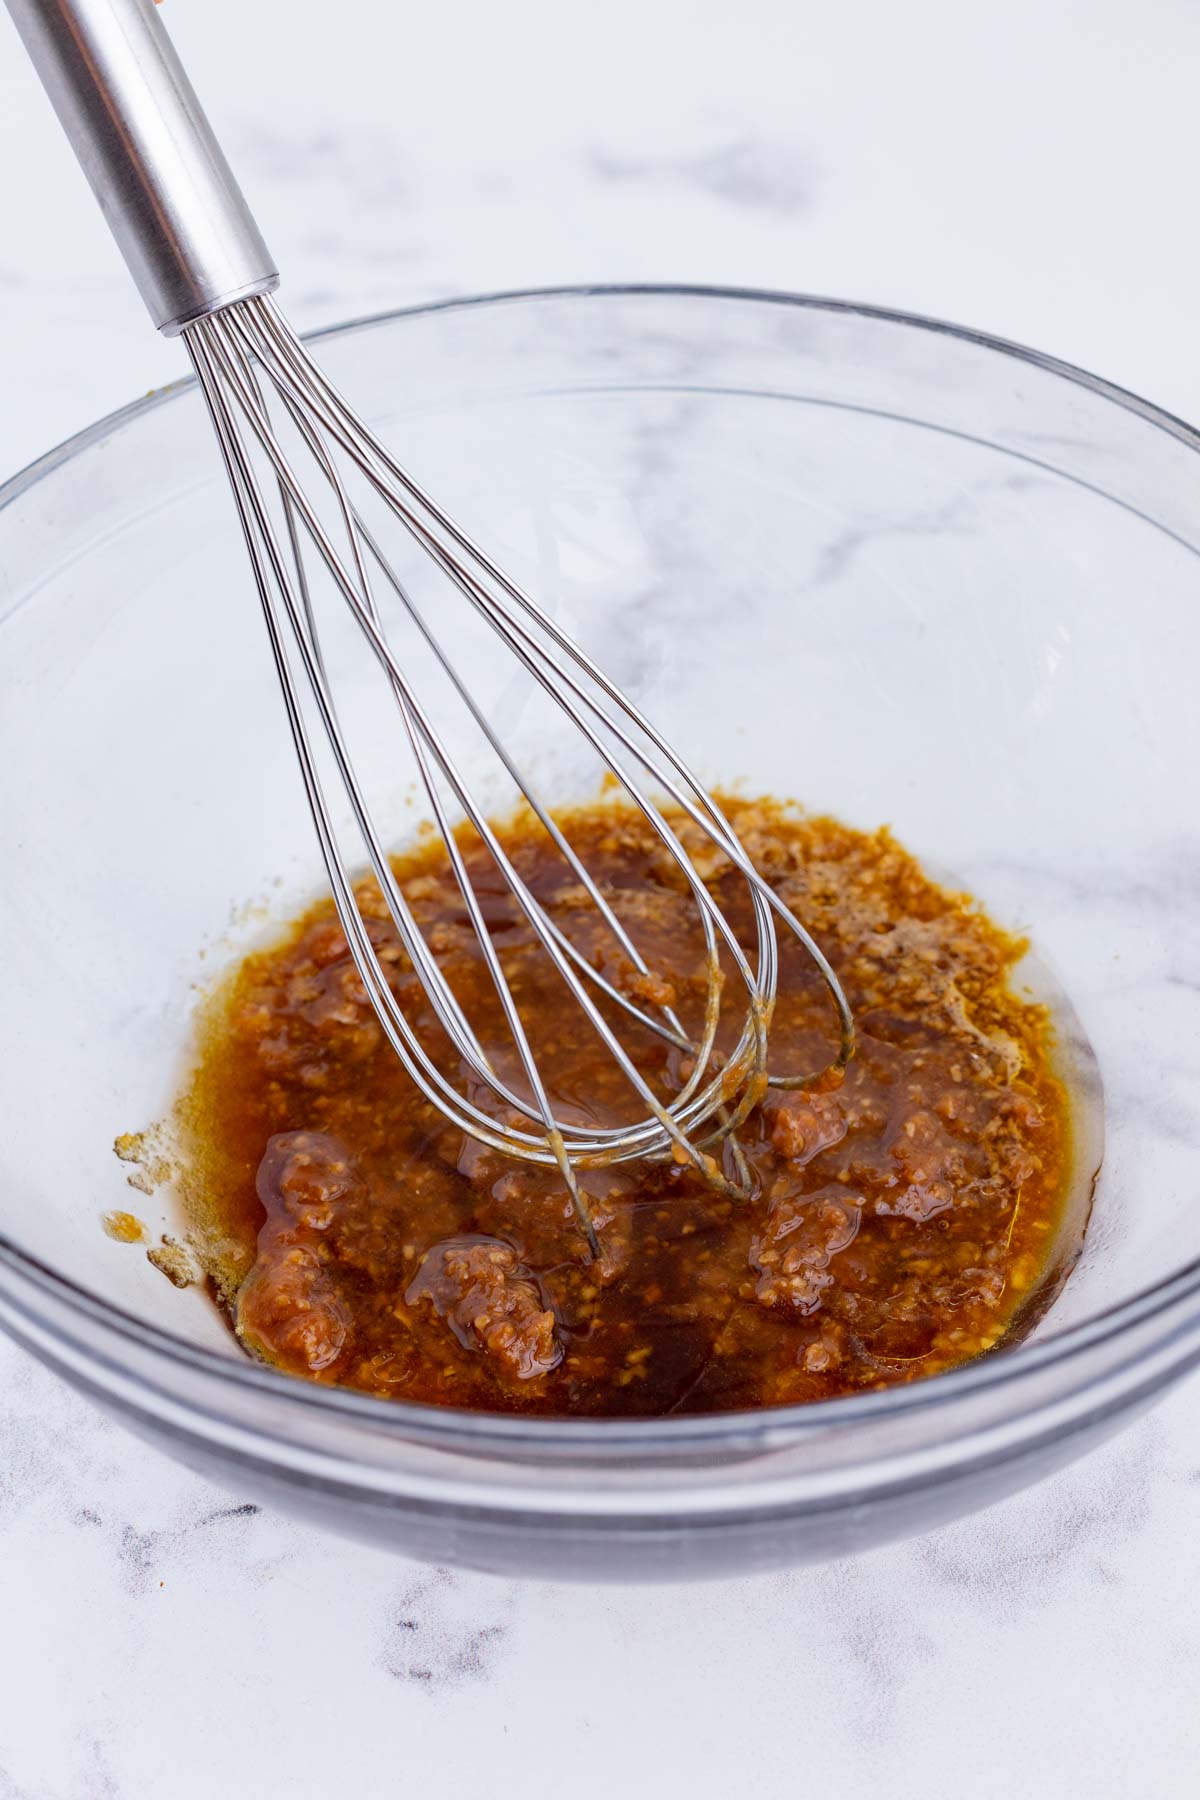 A whisk stirs the sauce ingredients.